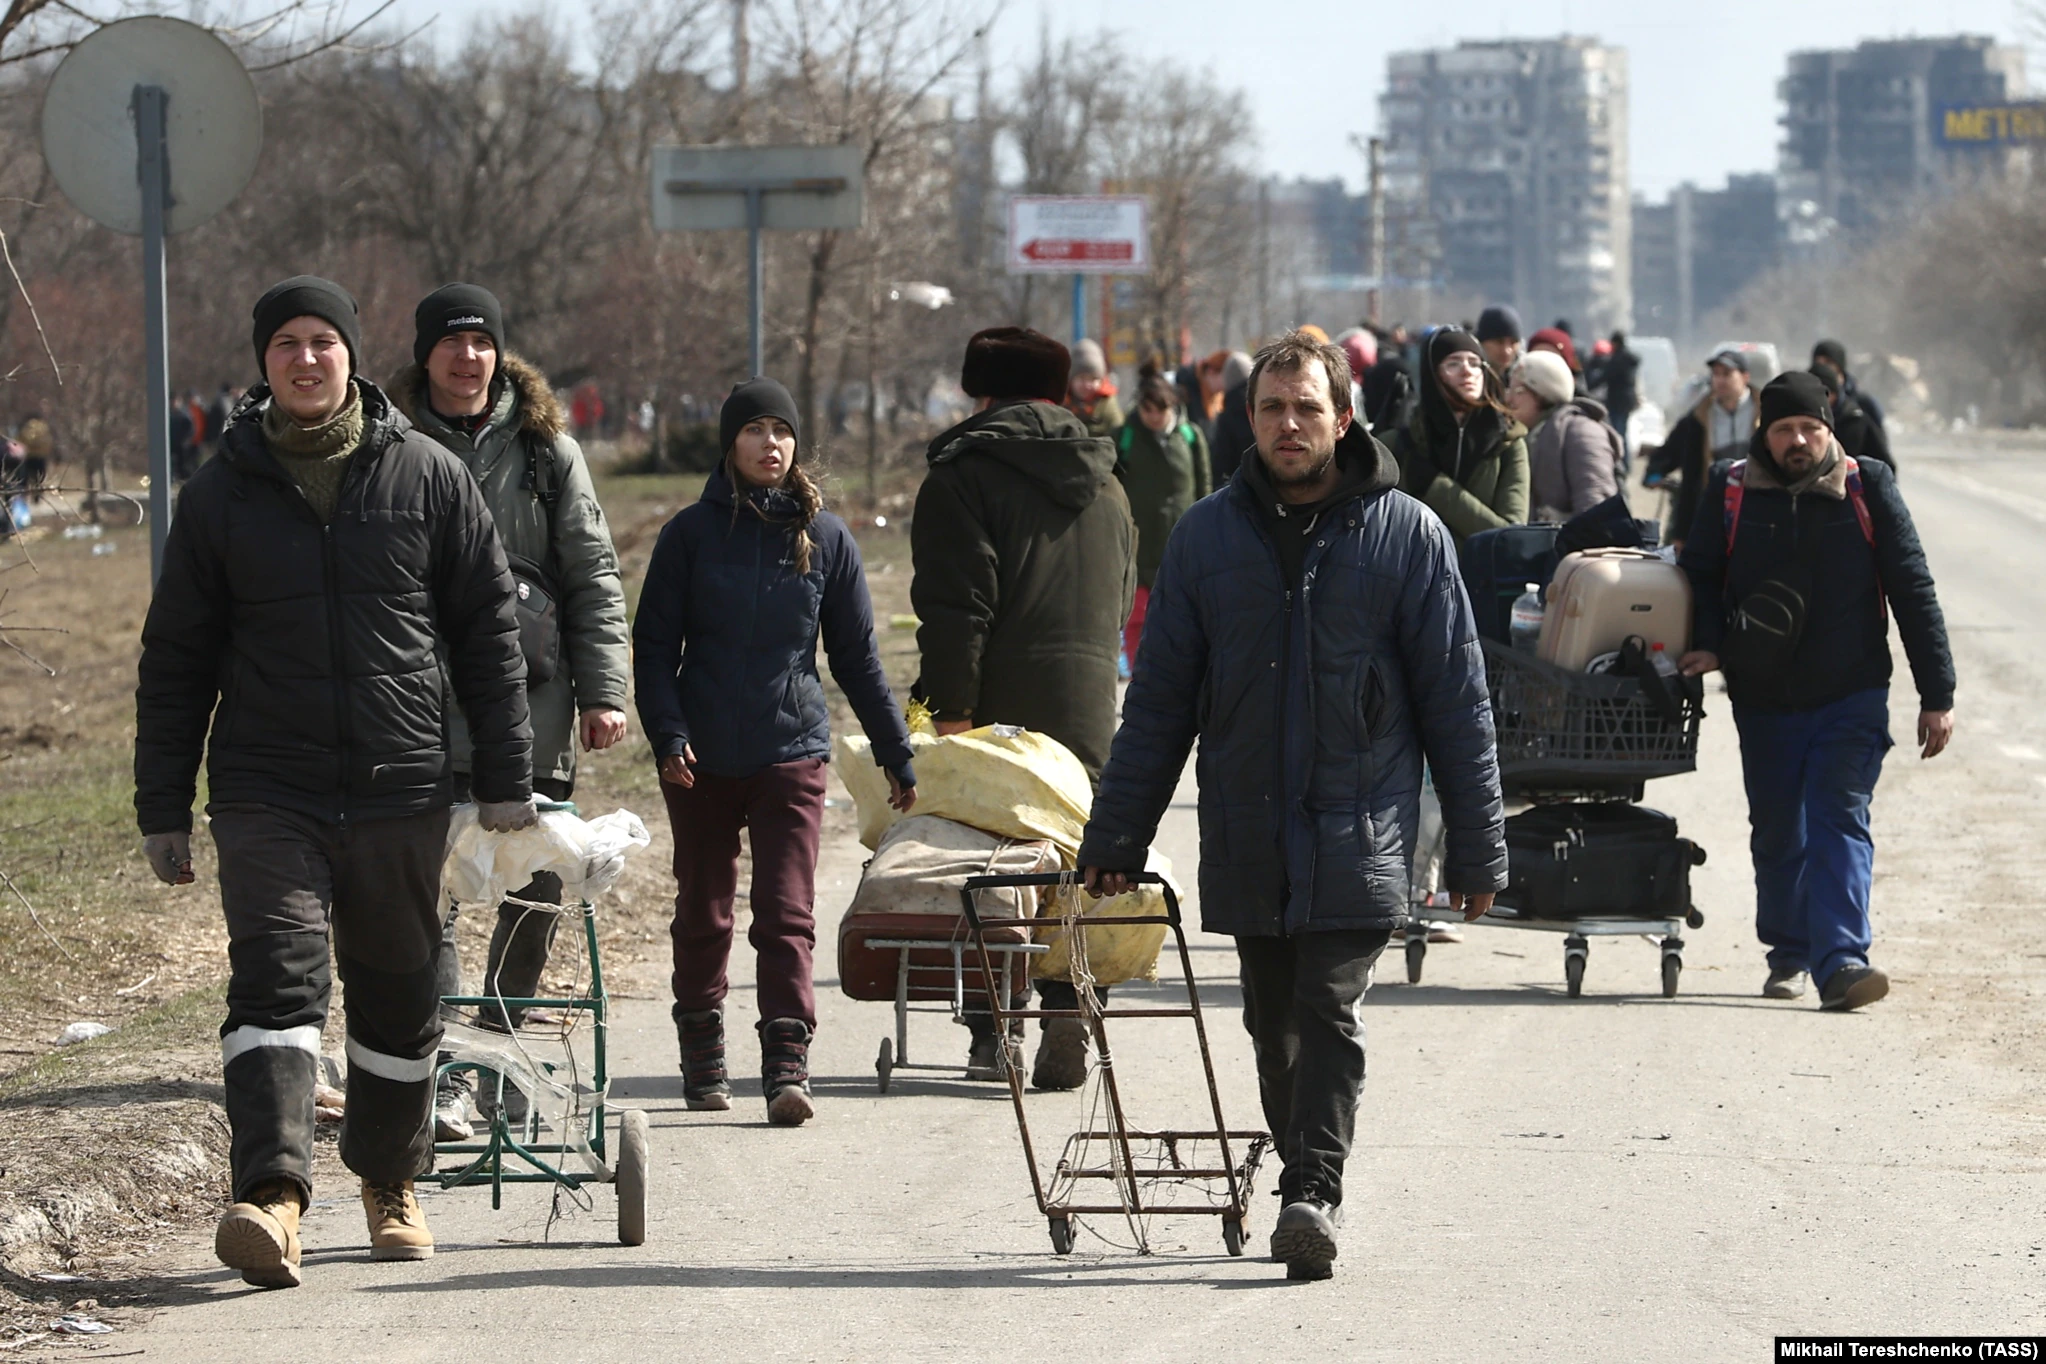 Mariupol residents prepare for an attempt to evacuate the embattled city of Mariupol on foot on March 20. Source ~